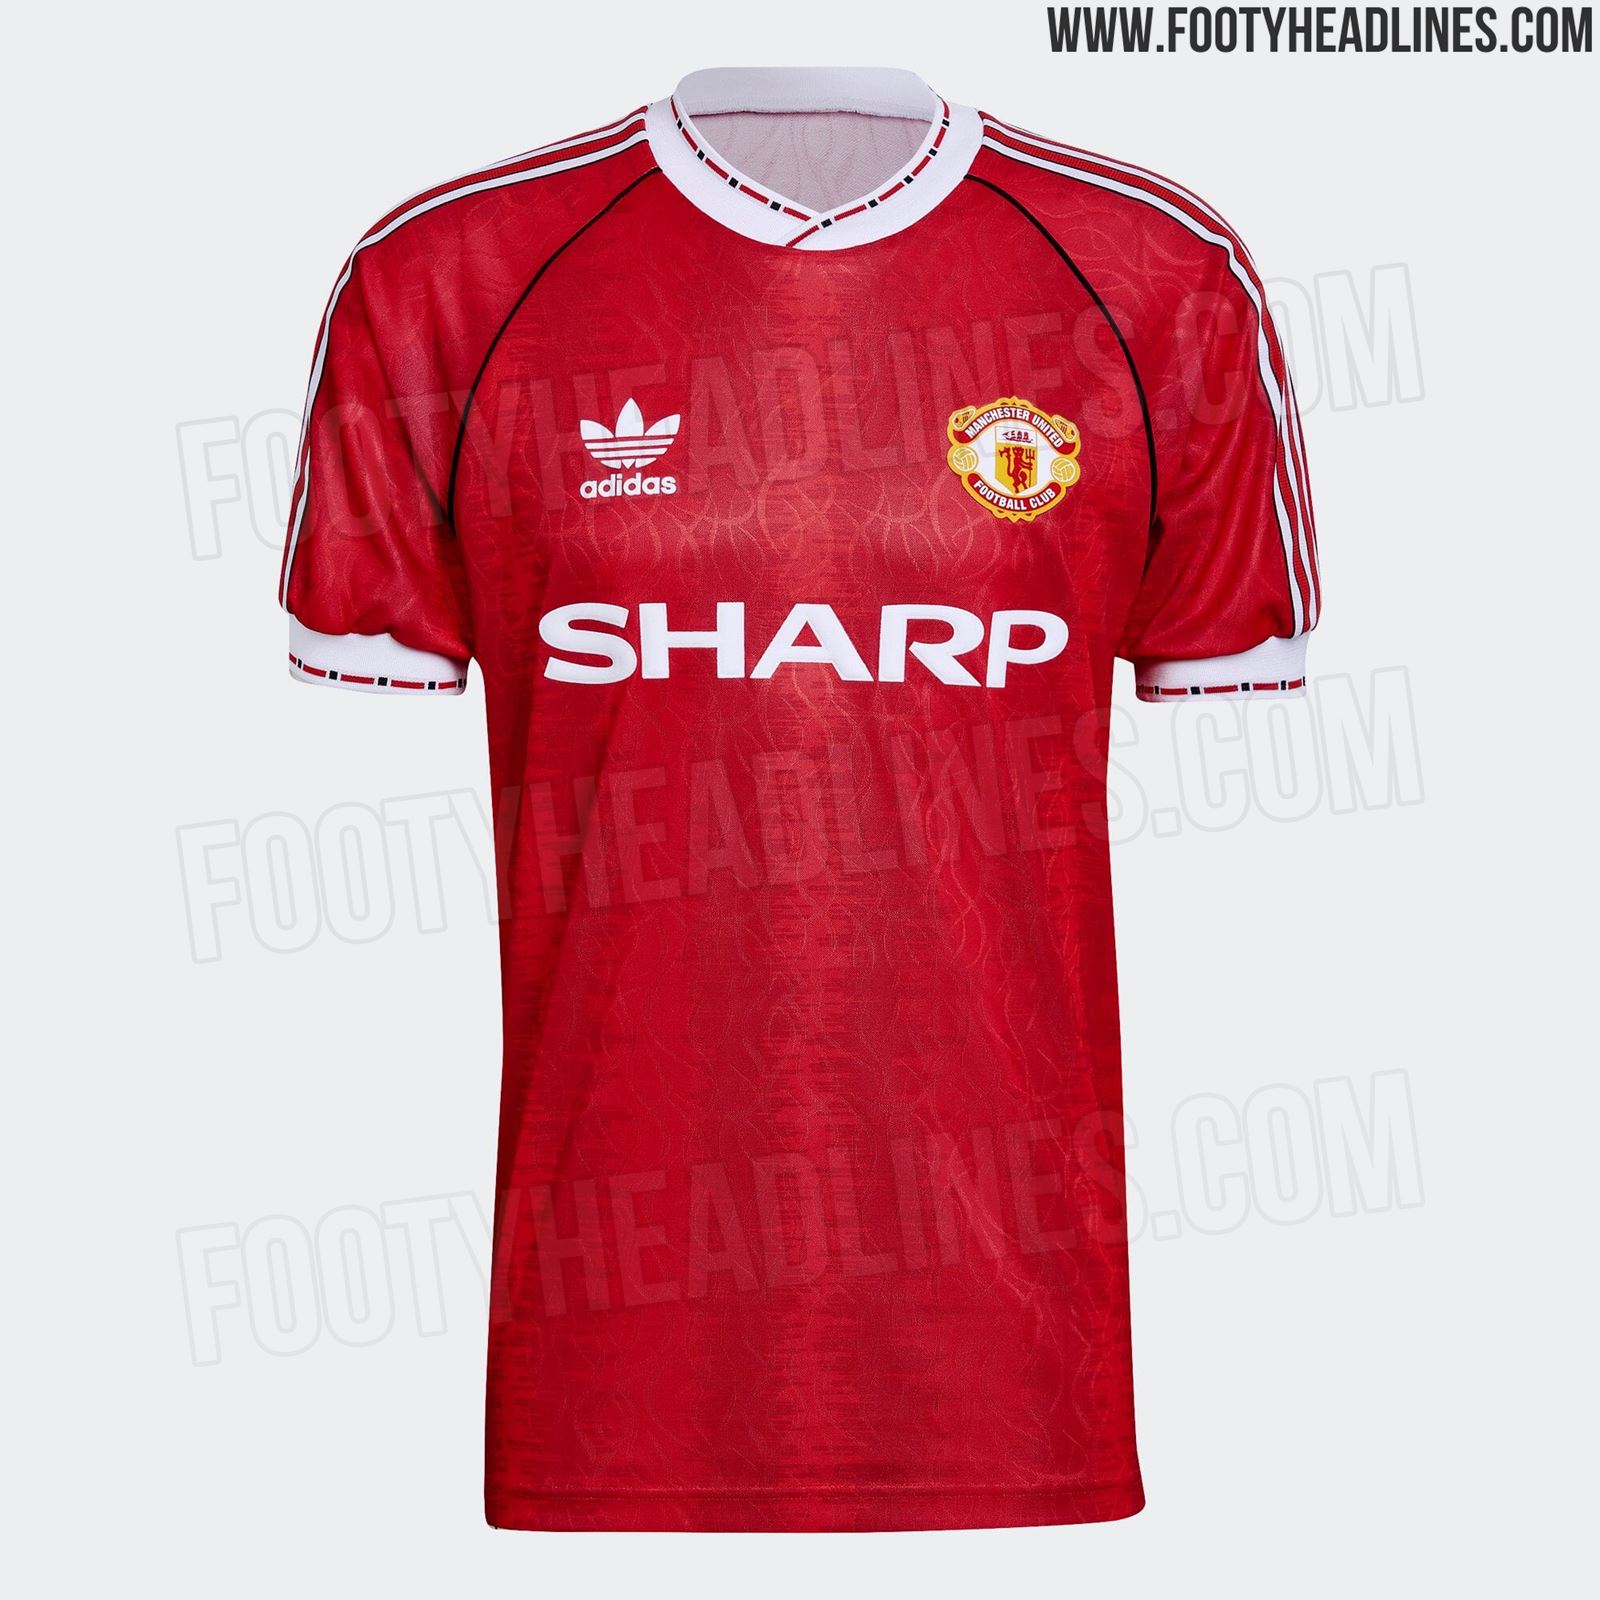 Monótono Tutor Publicidad Adidas Manchester United 1990 Remake Kits + Collection Released - Footy  Headlines